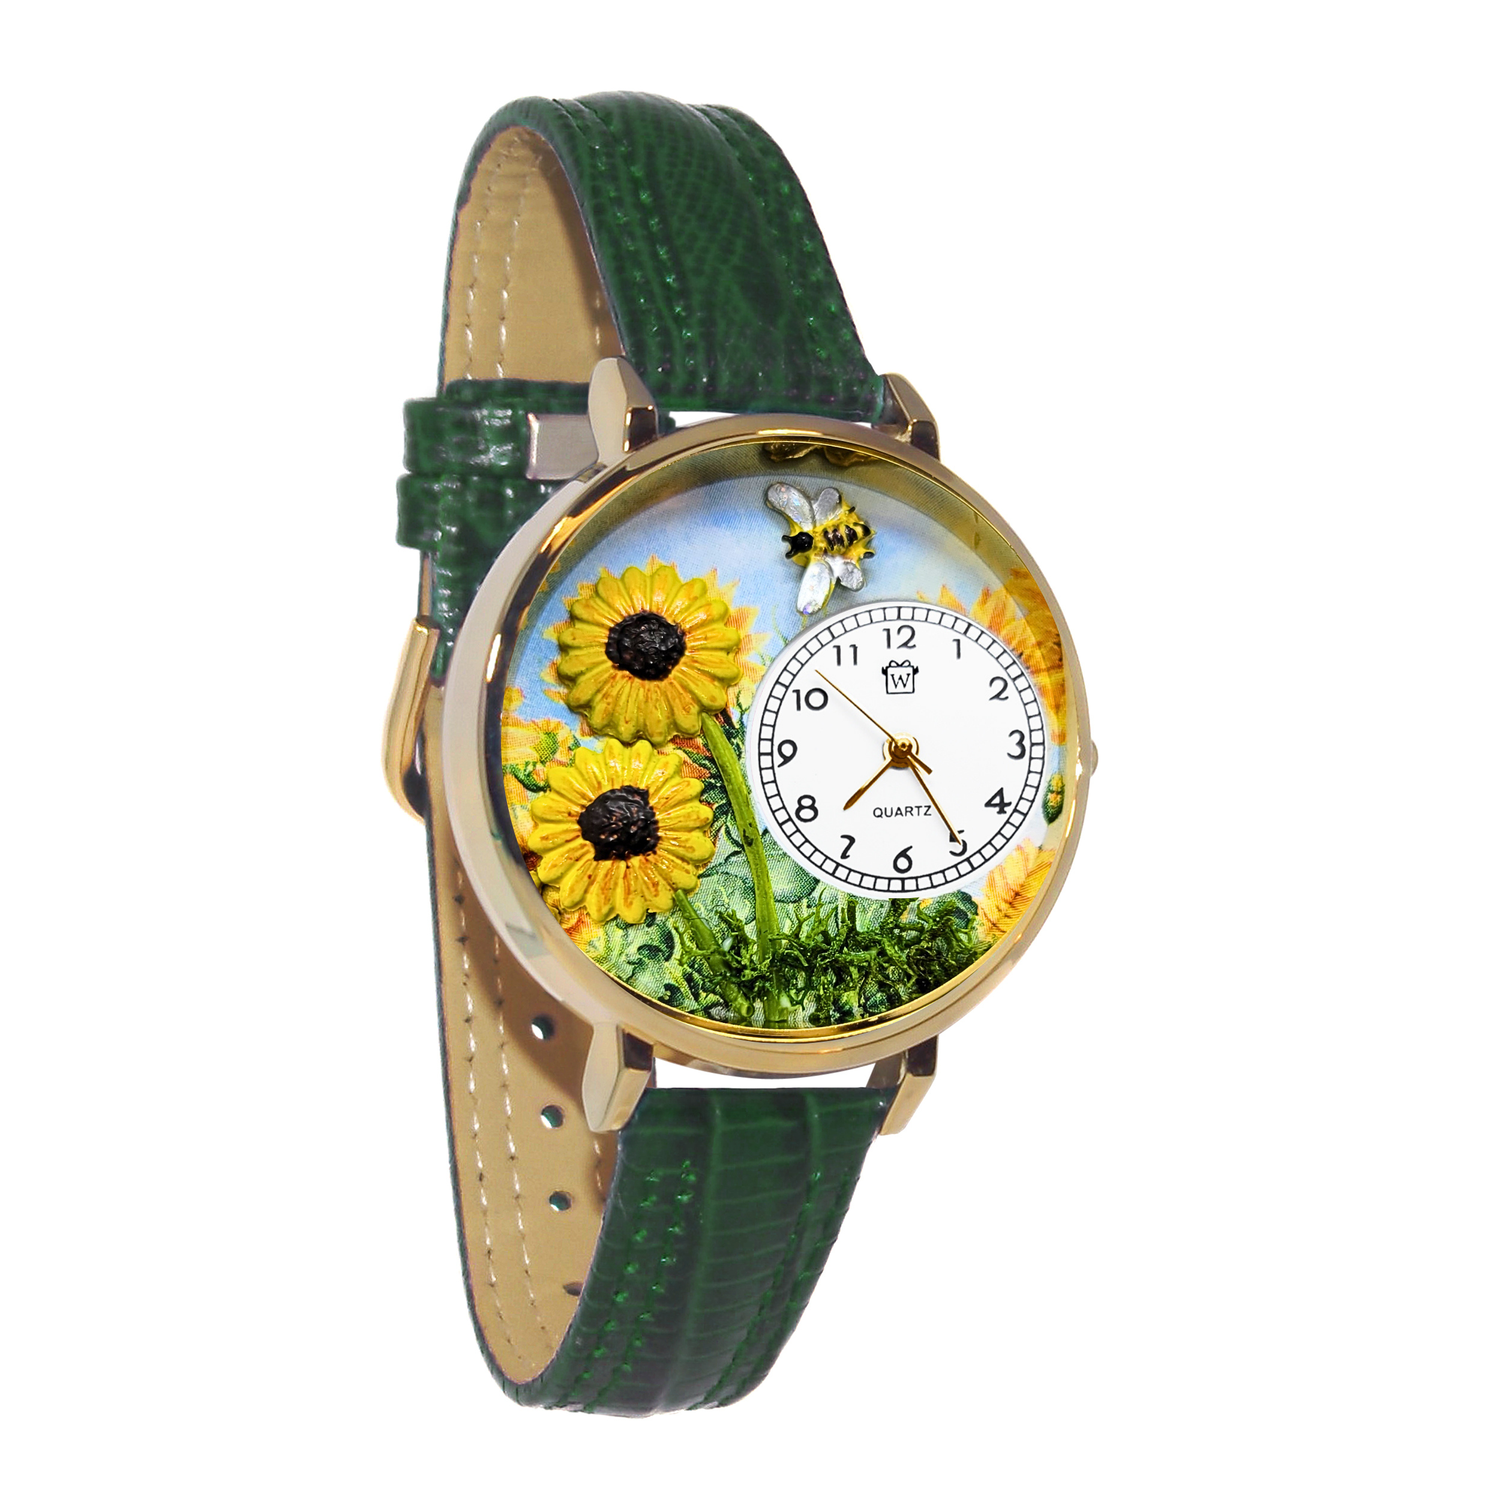 Whimsical Gifts | Sunflower 3D Watch Large Style | Handmade in USA | Holiday & Seasonal Themed | Spring & Summer Fun | Novelty Unique Fun Miniatures Gift | Gold Finish Green Leather Watch Band